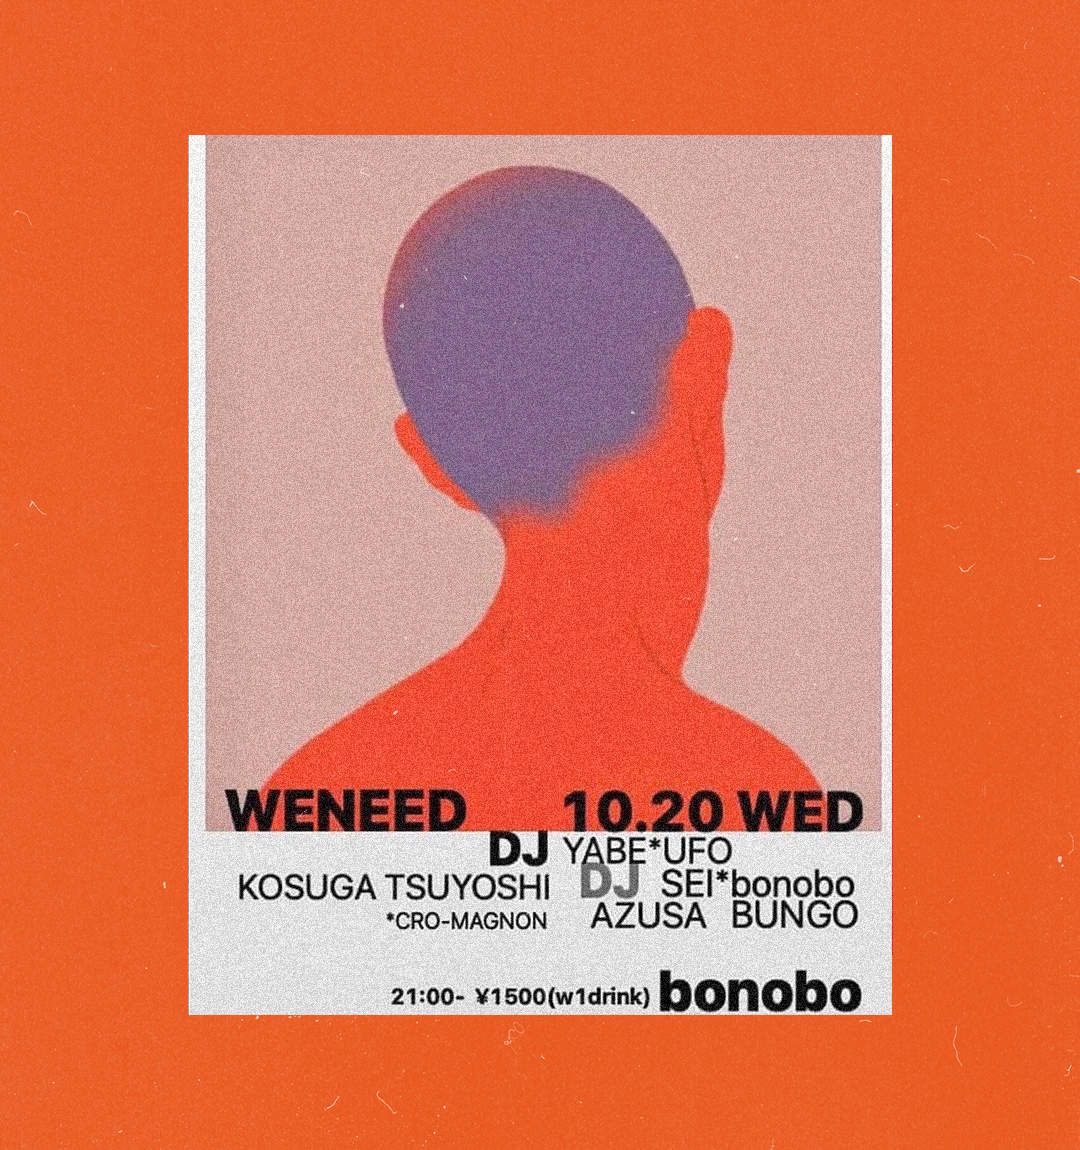 The best bars and clubs in Tokyo | A red graphic poster for Bonobo club